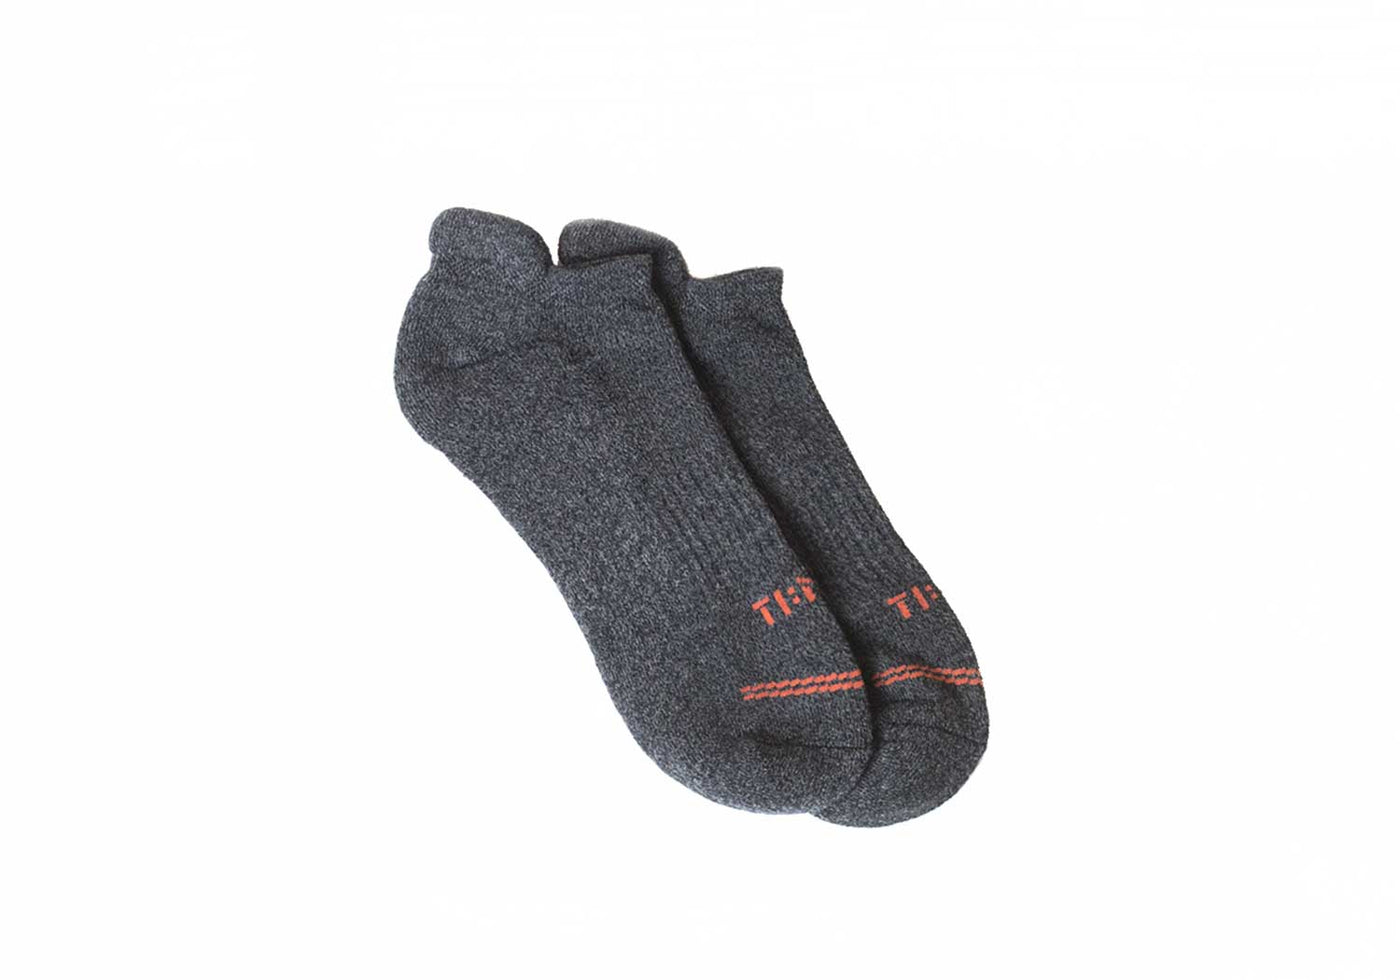 TIME Comfort Socks (unisex) - Ankle Socks - 1 pair / Small by TIME Slippers